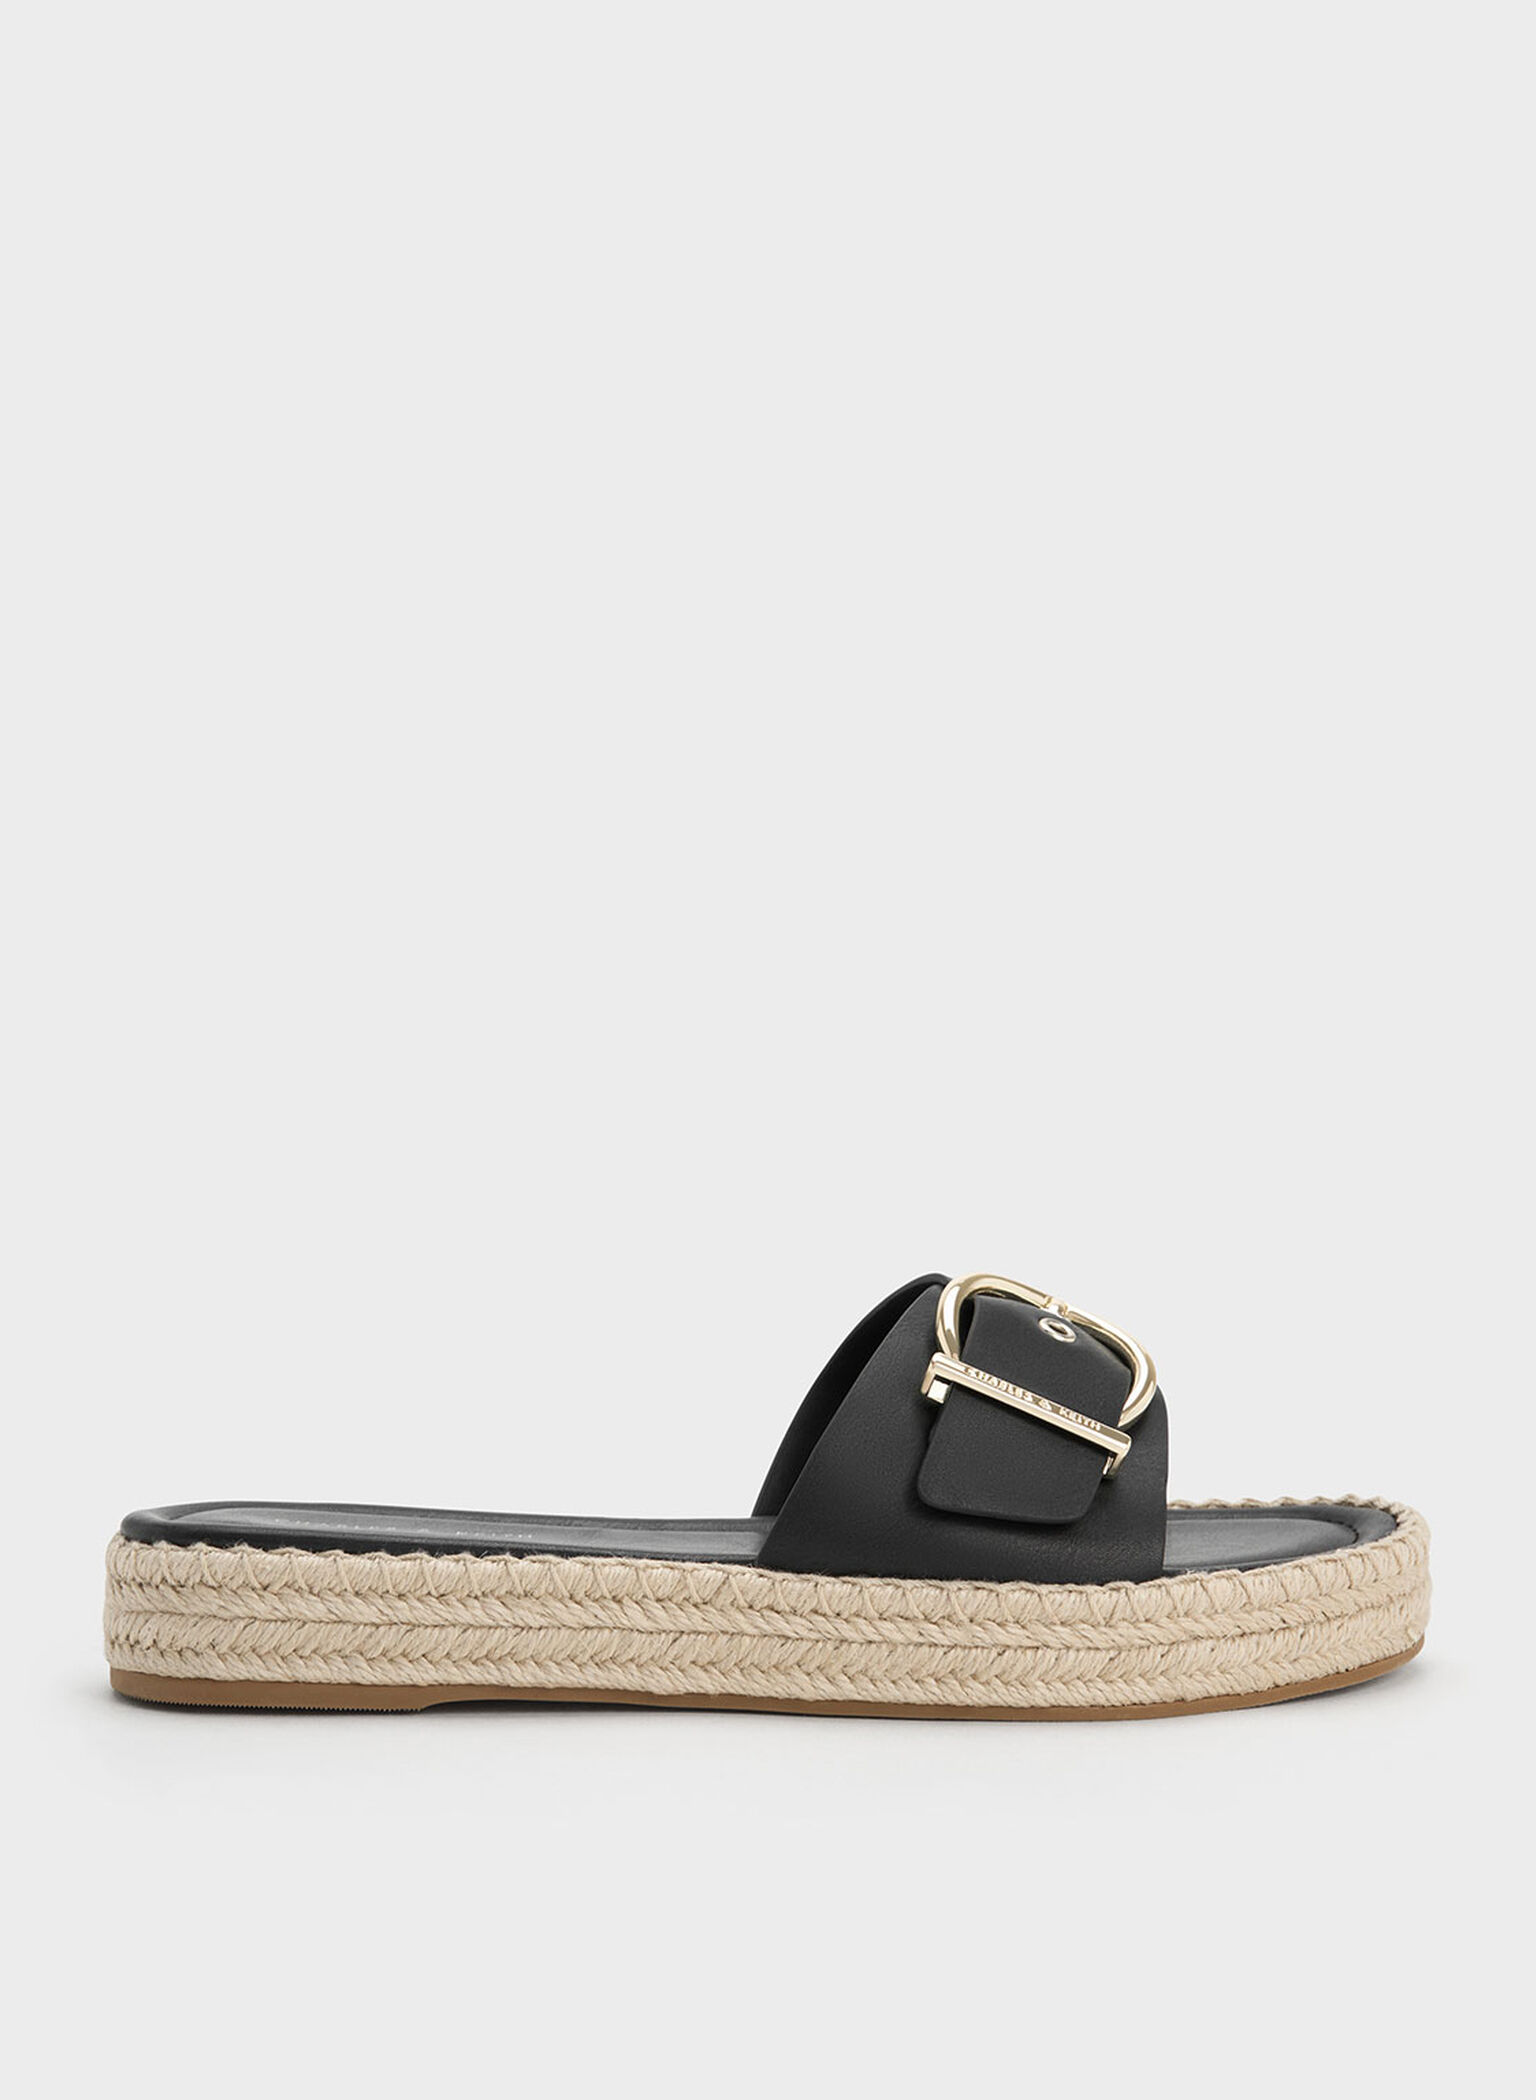 Charles & Keith - Women's Buckled Espadrille Flat Sandals, Black, US 5